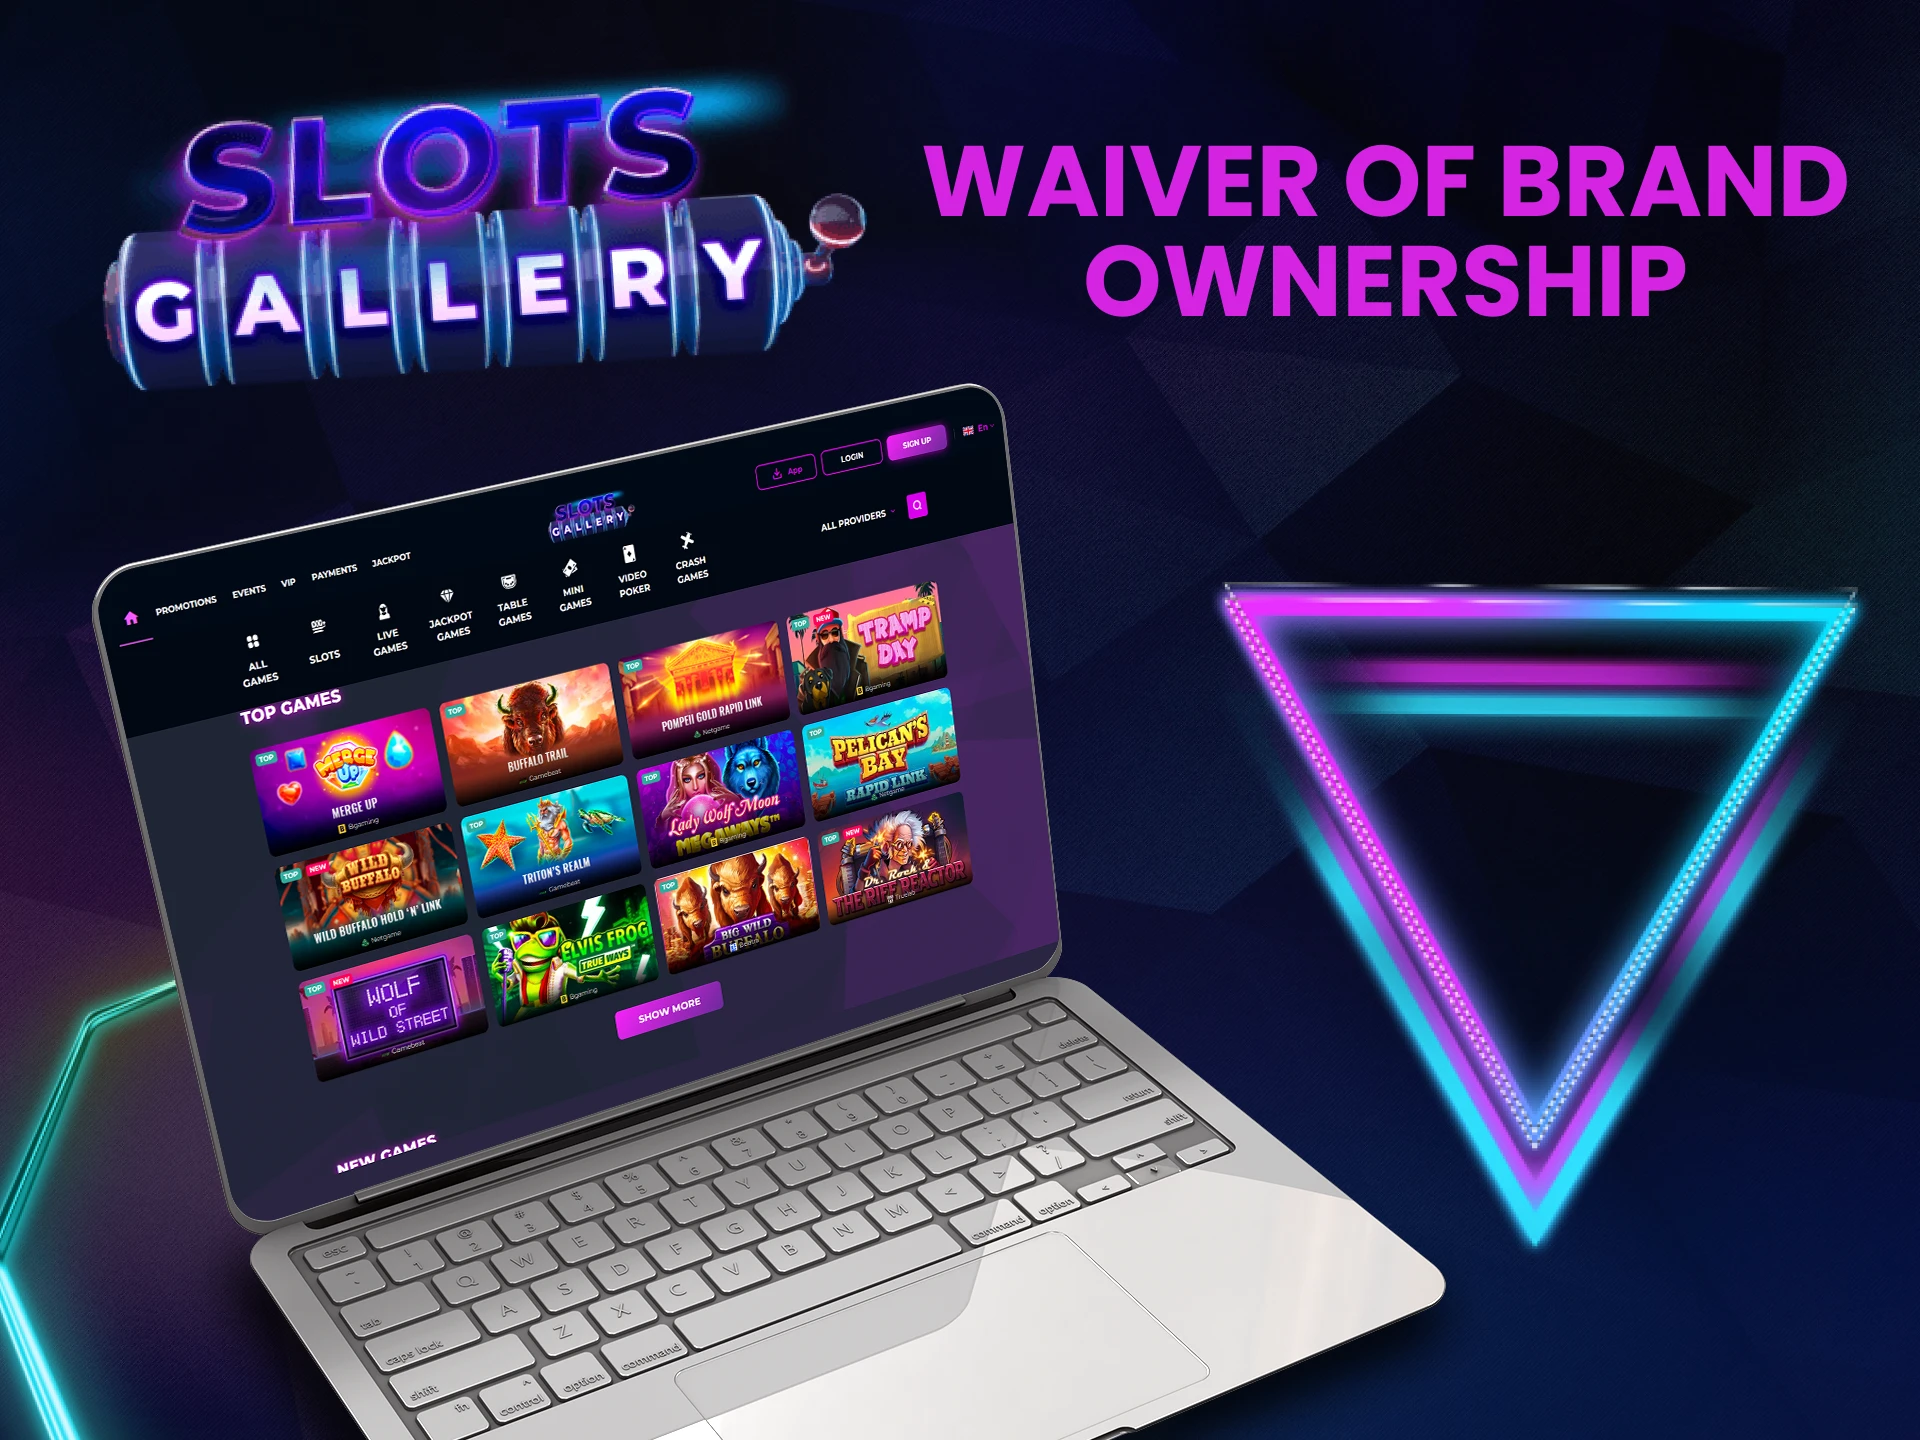 We will tell you who owns the Slots Gallery brand.